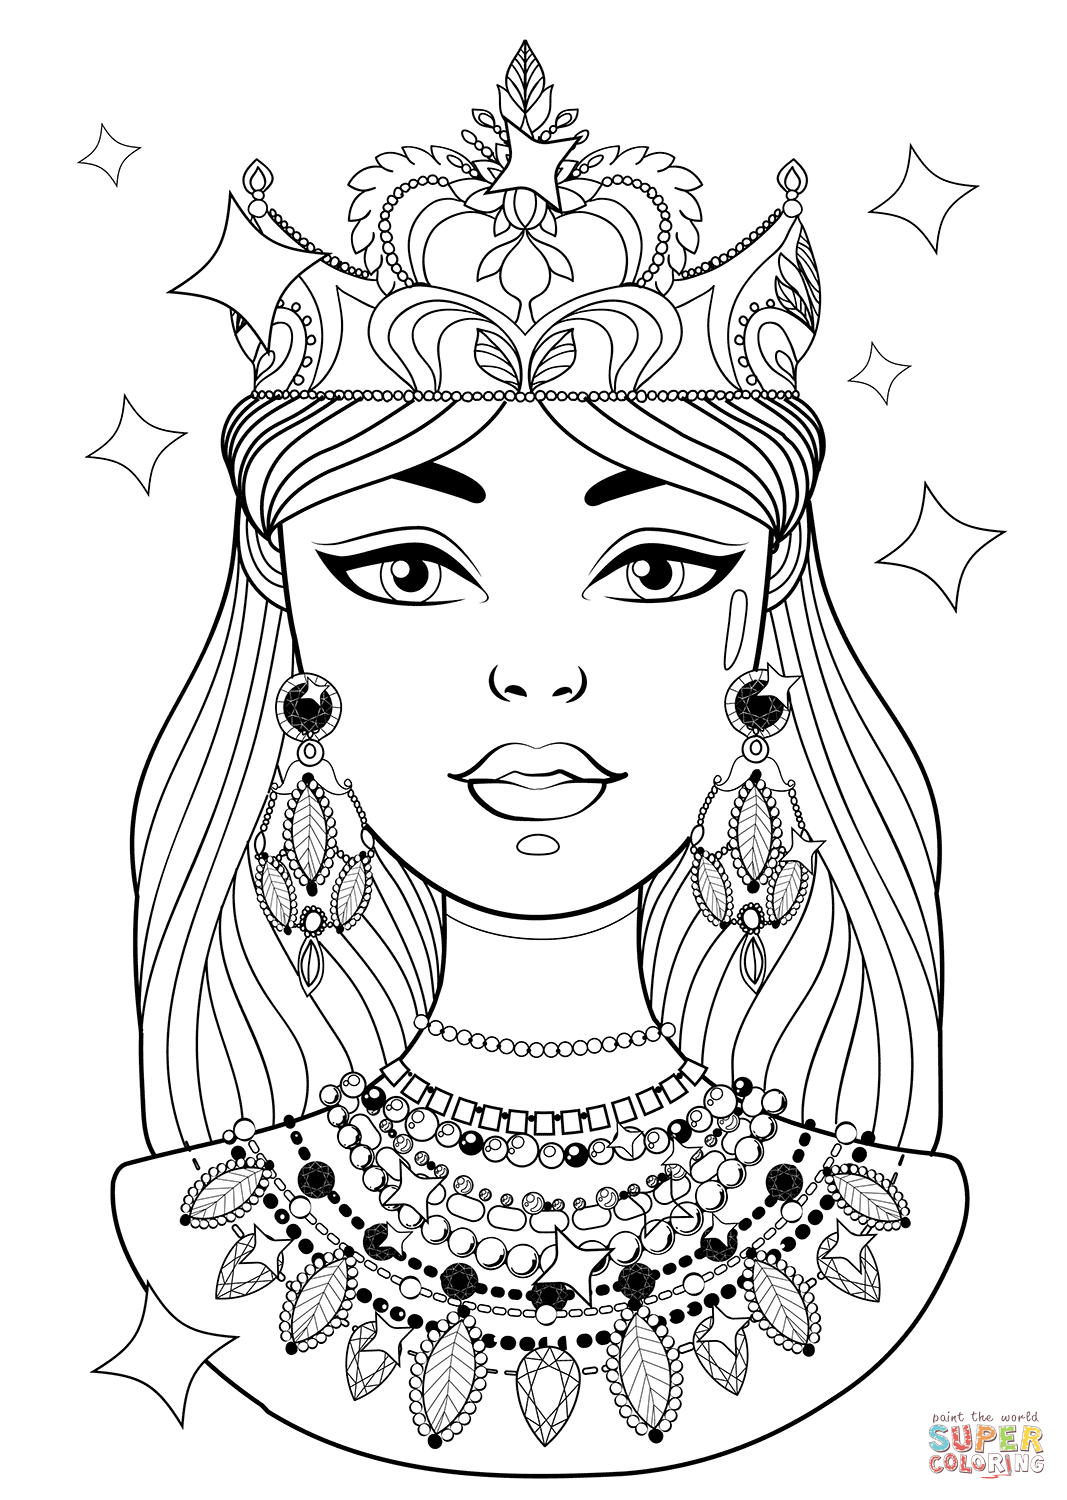 Shining princess with necklaces coloring page free printable coloring pages